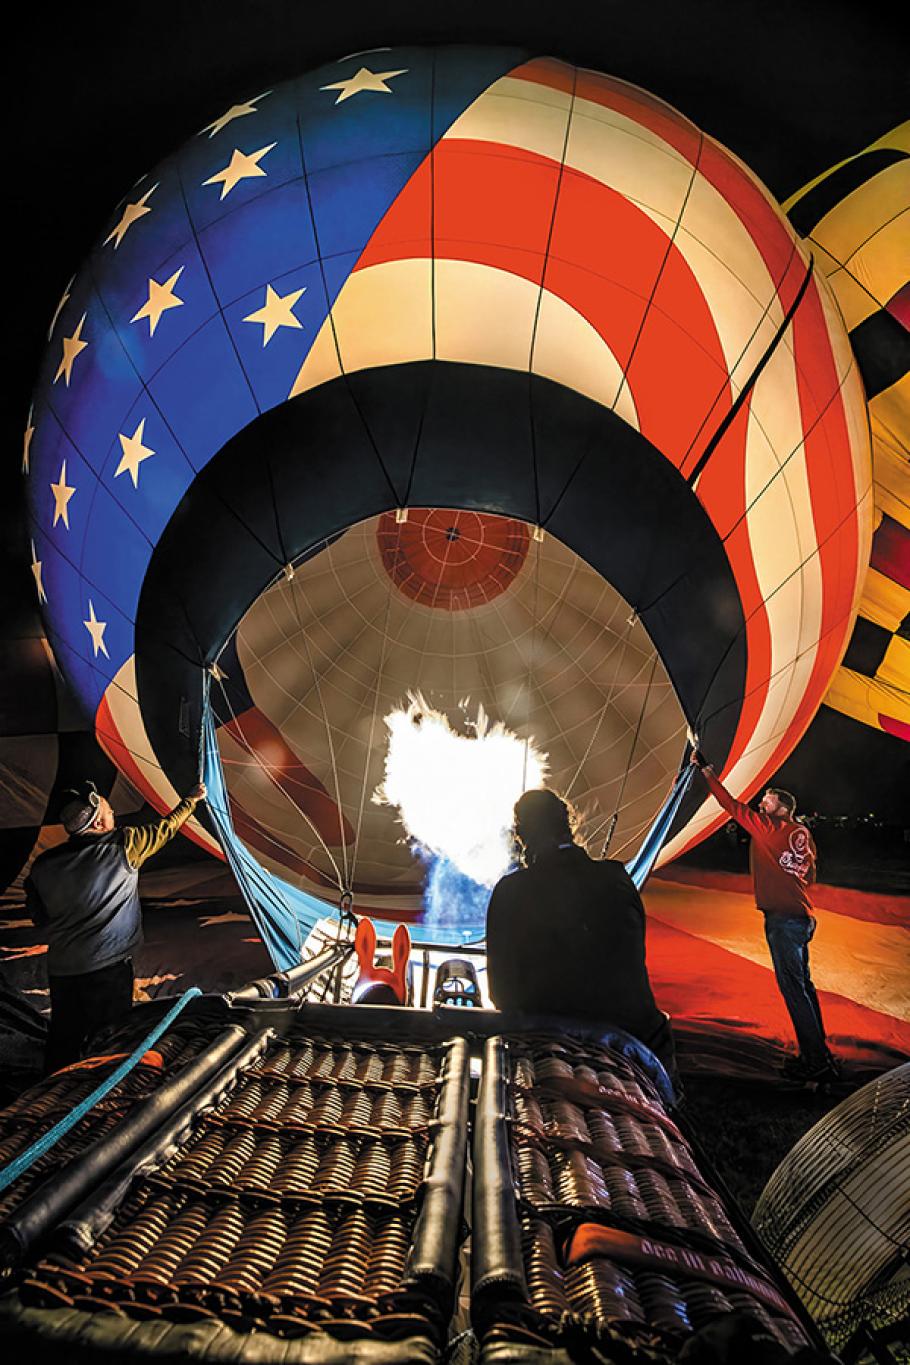 Below a dark sky, three people attend to the inflation of a balloon envelope attached to a wicker basket. Both the envelope and basket lie on their sides on the ground. The envelope bears the red, white, and blue stars and stripes of the American flag and is inflated.